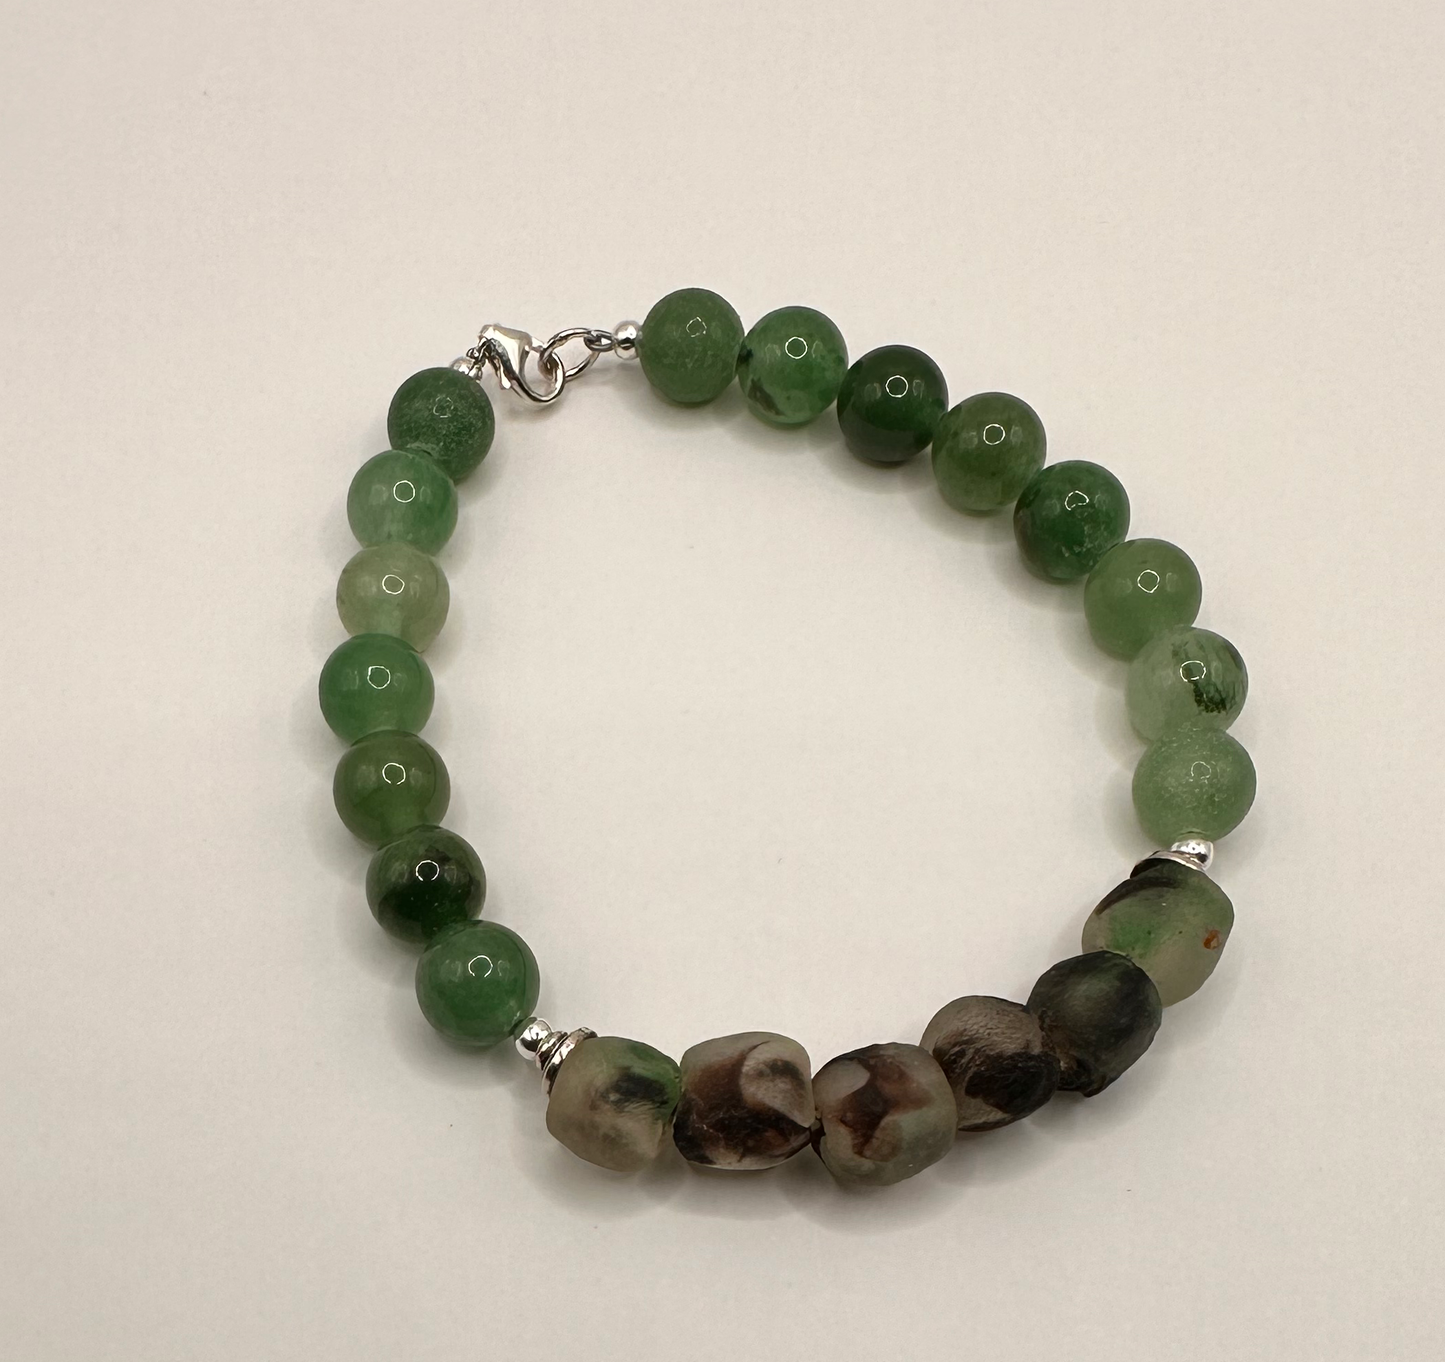 Green Aventurine Gemstone, African Recycled Beads with Sterling Silver Bracelet